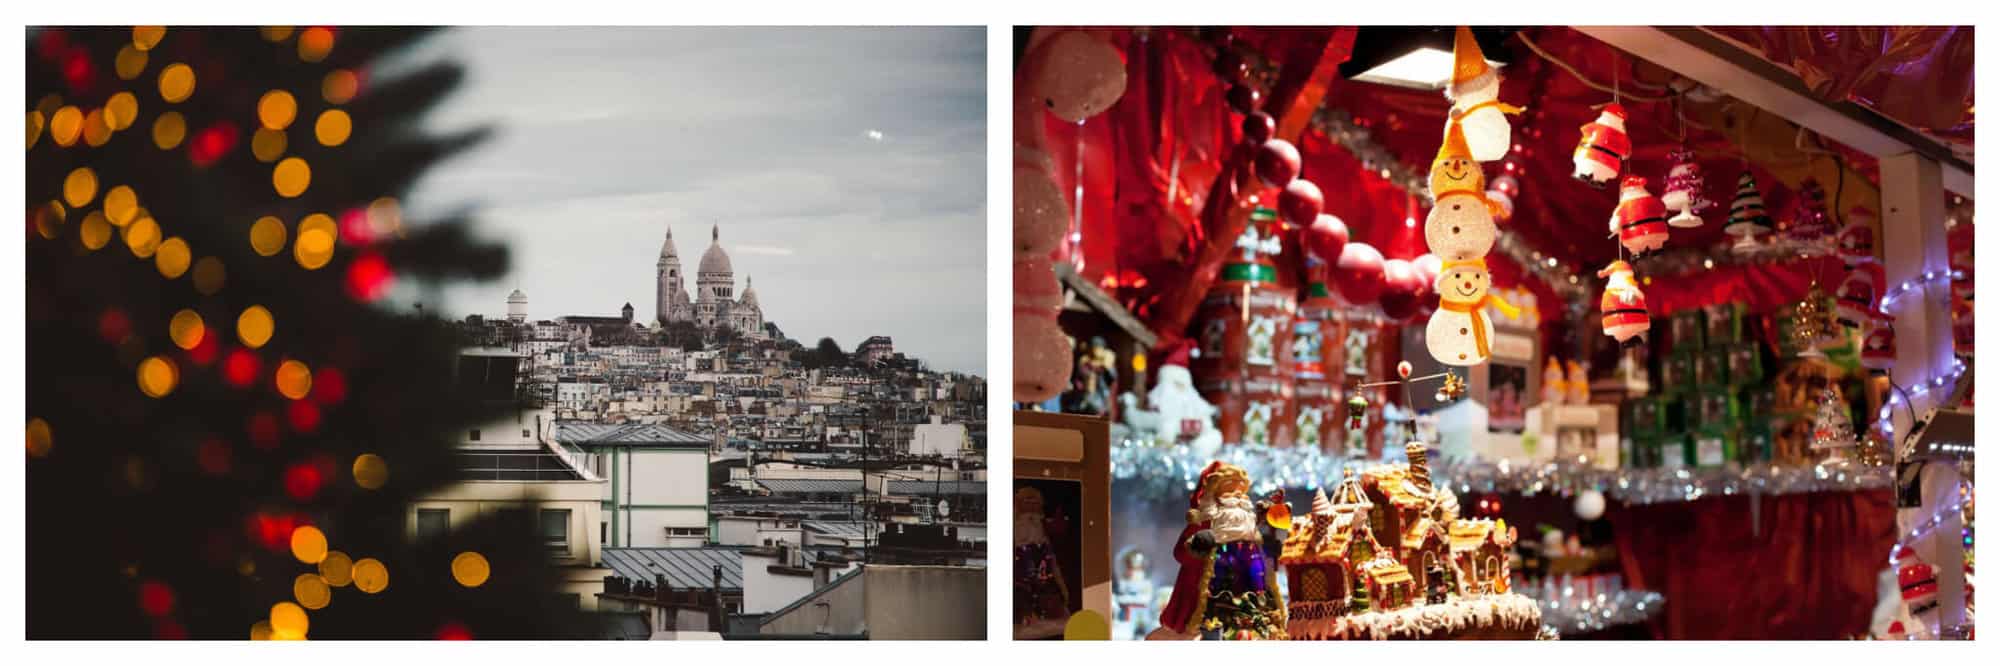 LEft: a photo of a Christmas tree with Montmarte Paris in the background. Right: a photo of a Christmas market in Paris